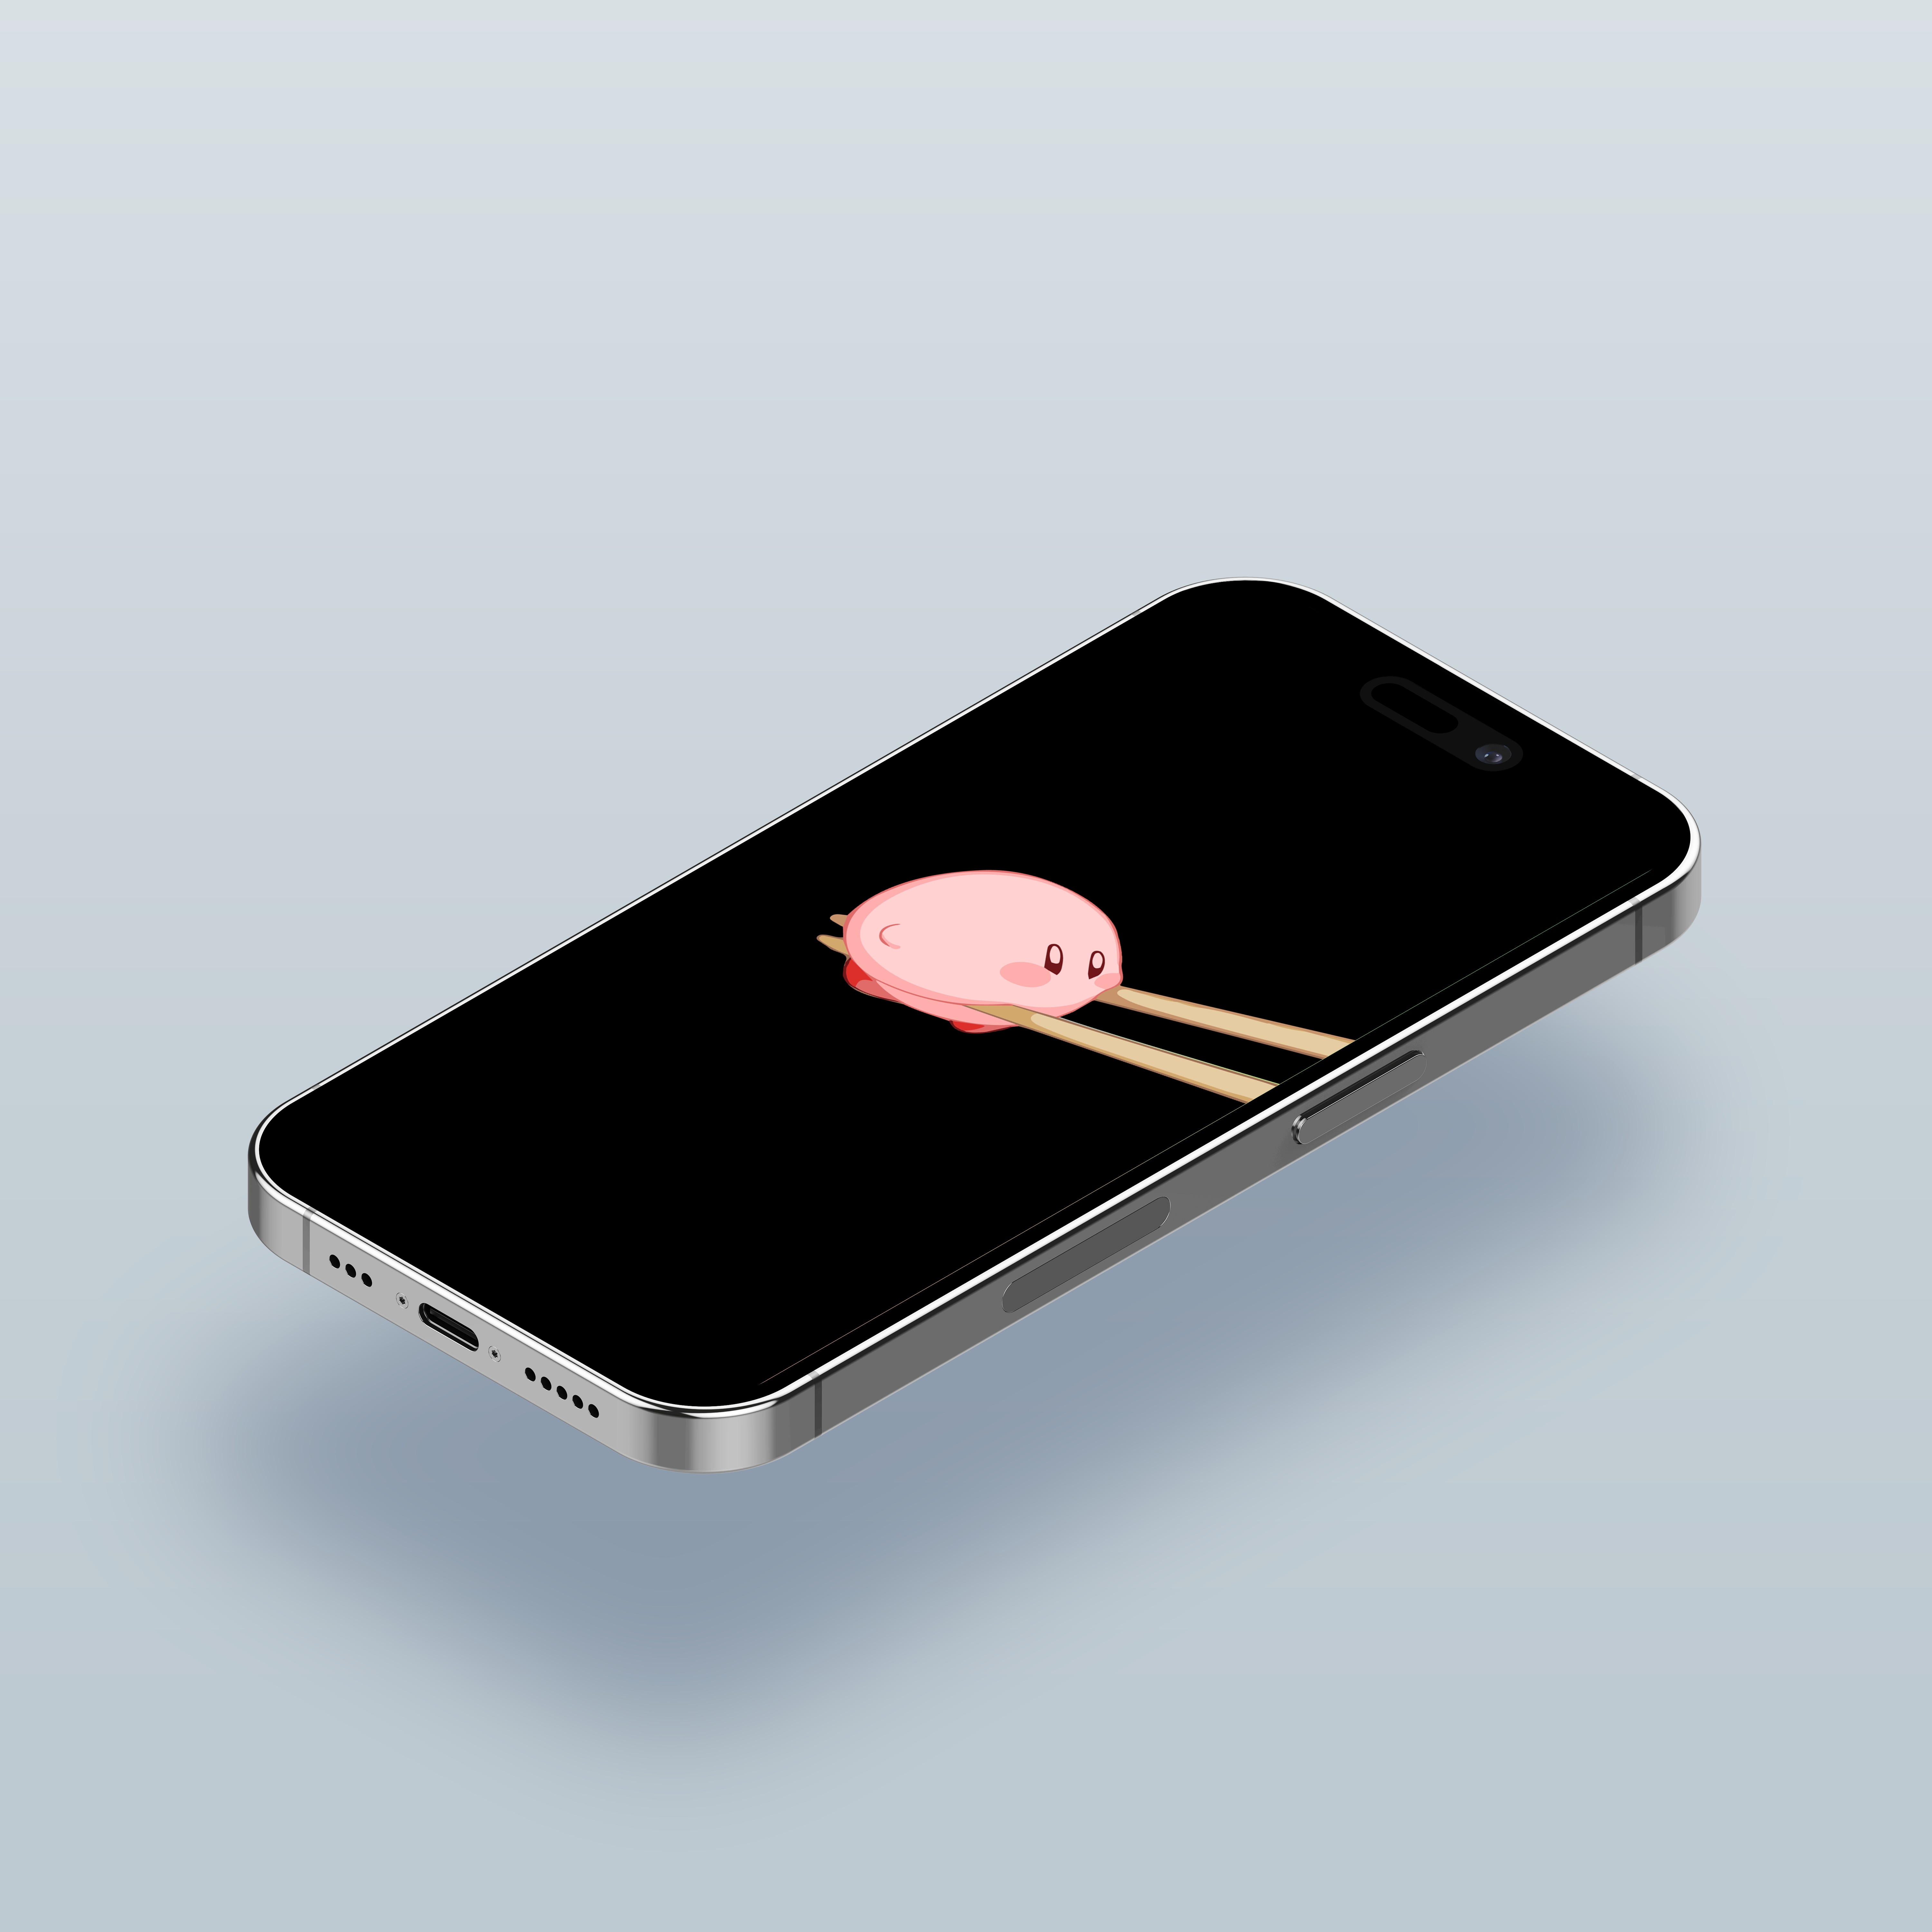 Kawaii iPhone Wallpapers A Touch of Joy to Your Digital Life 2023